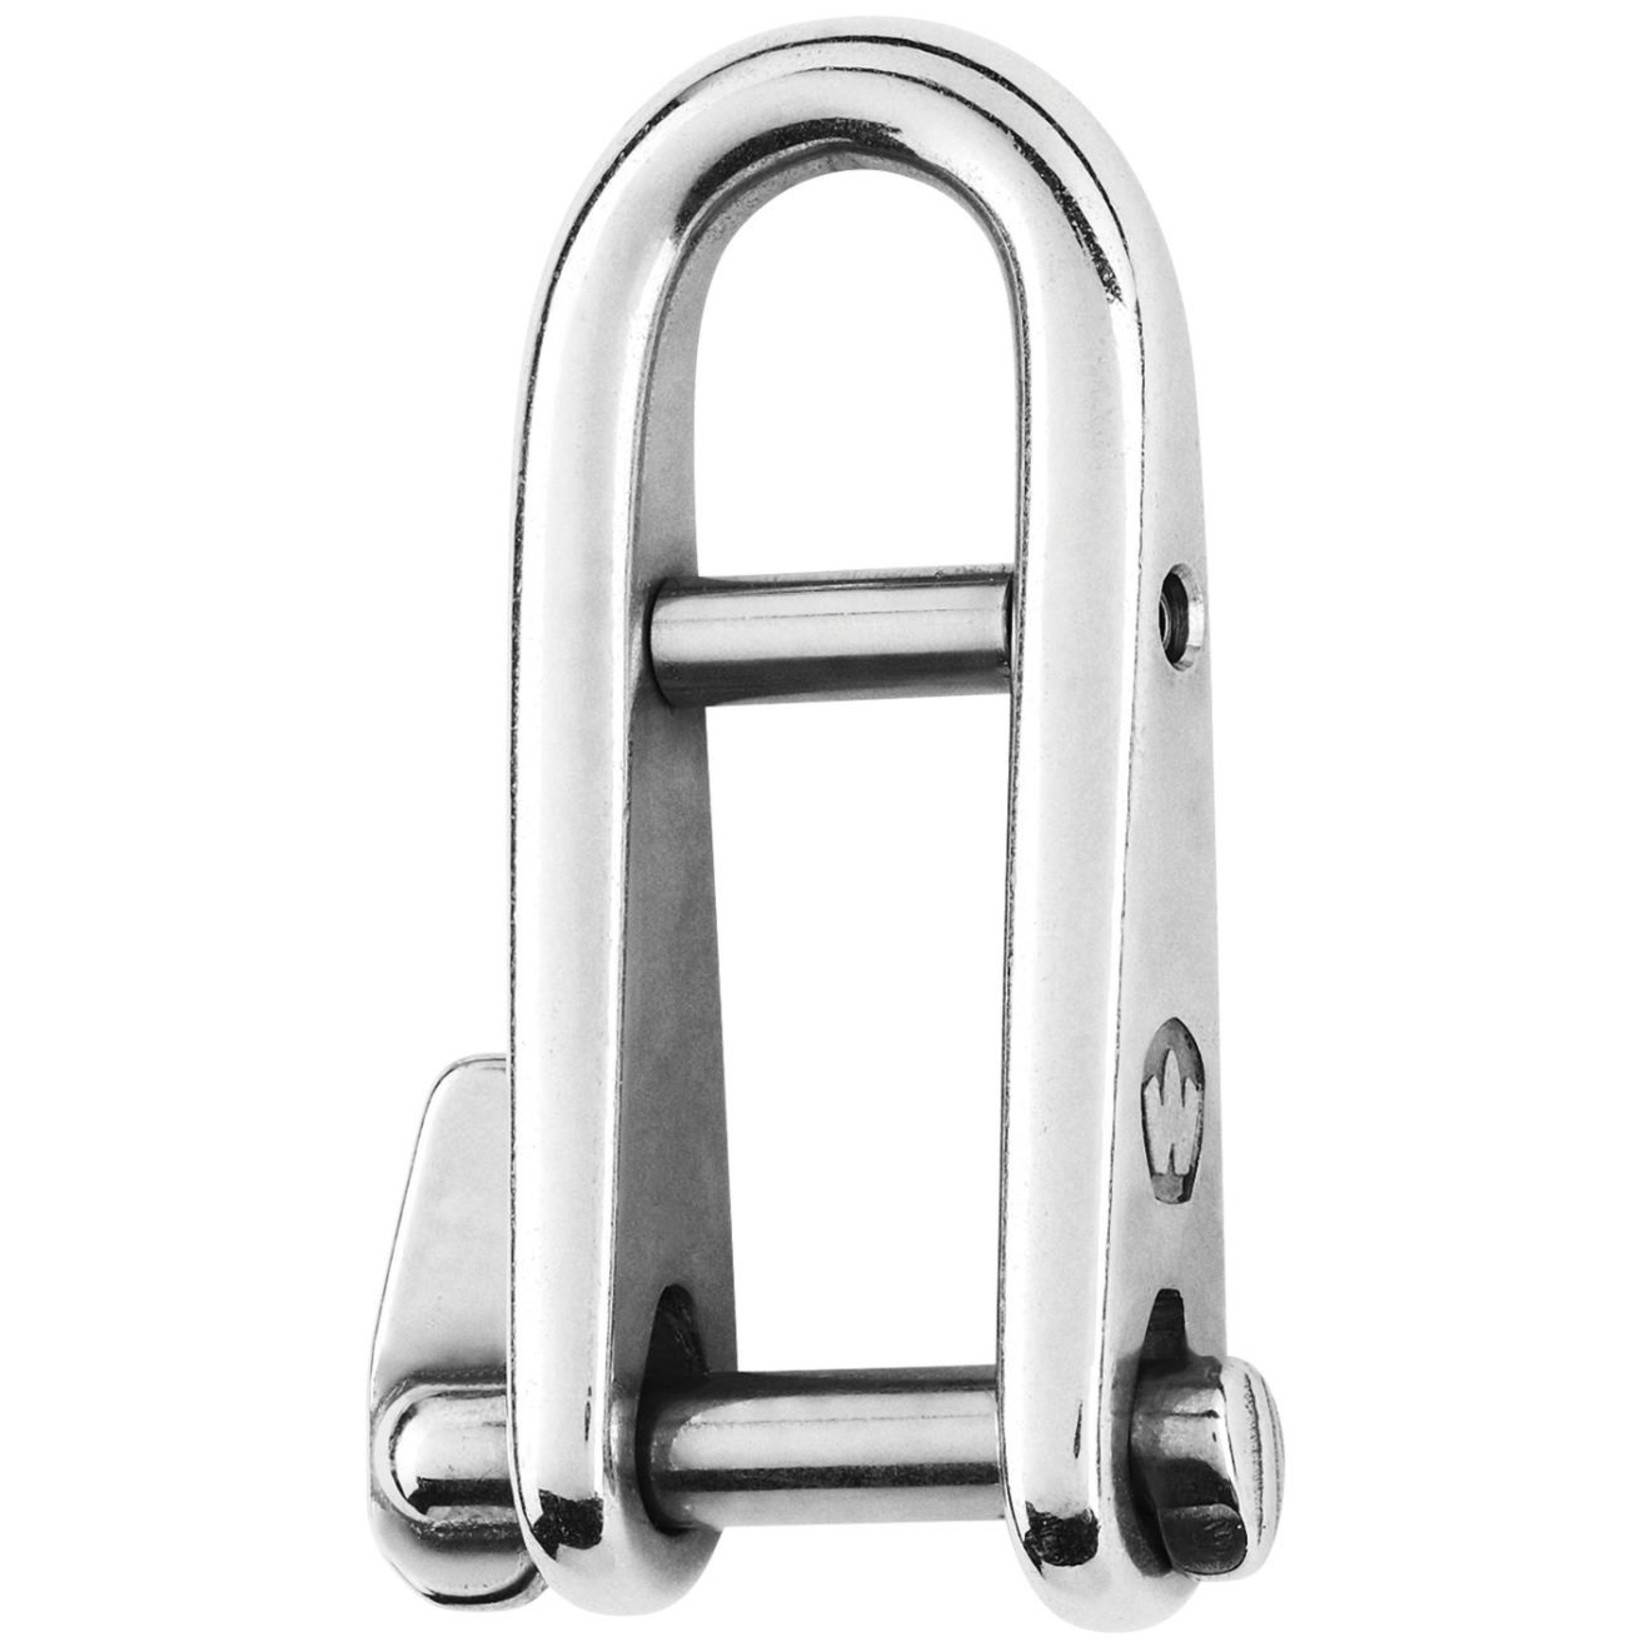 Wichard HR key pin shackle with bar - Dia 6 mm